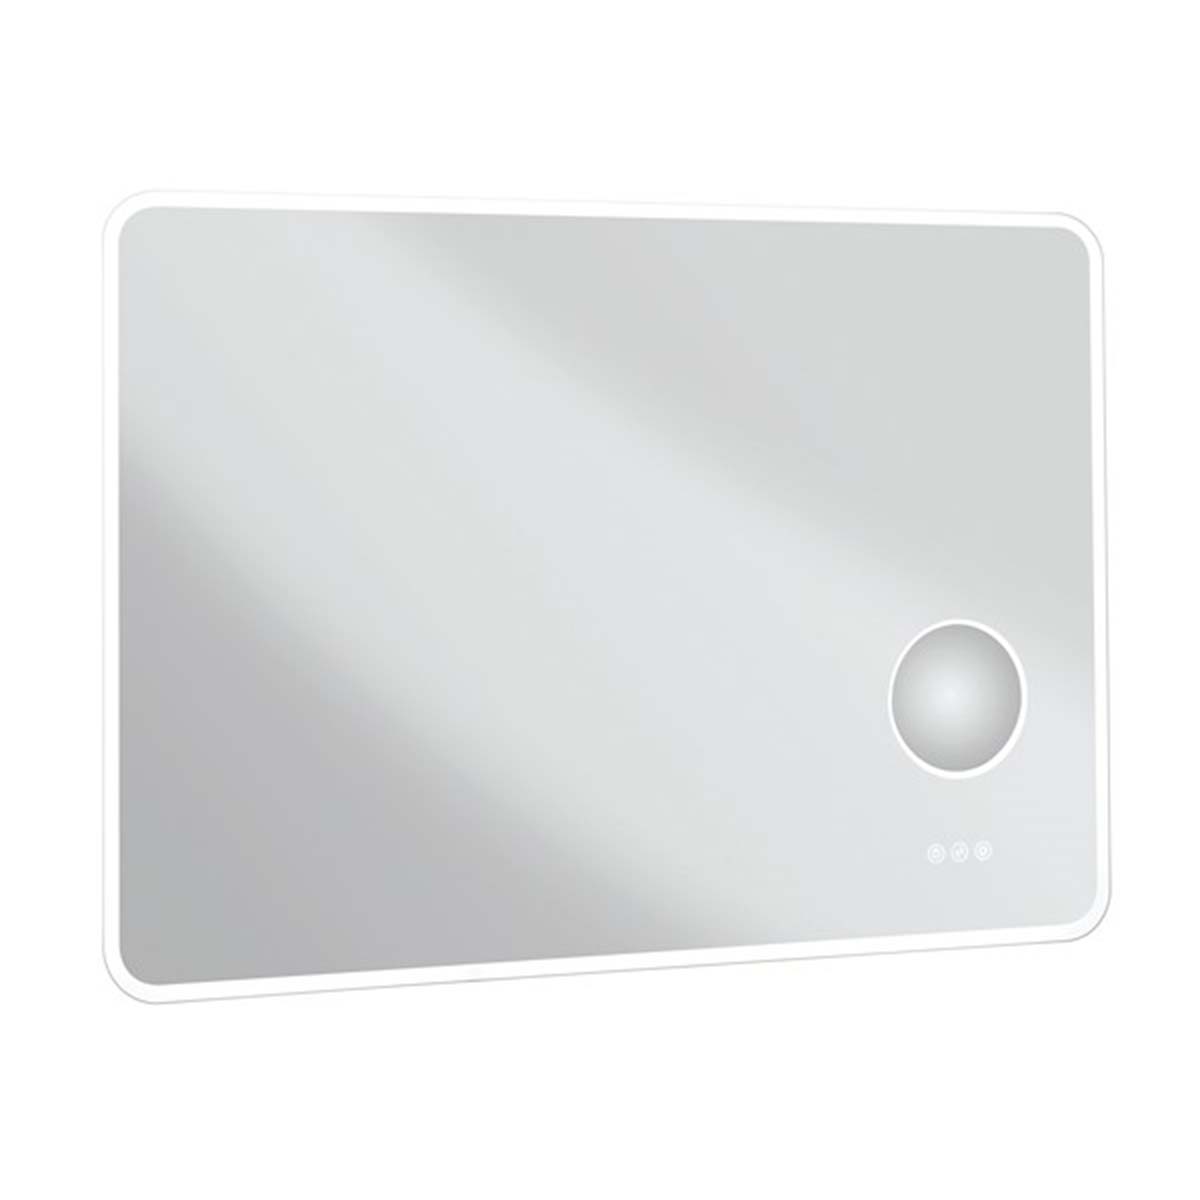 Crosswater Svelte Glow LED Illuminated Fog Free Mirror with Magnifier 700x1000mm